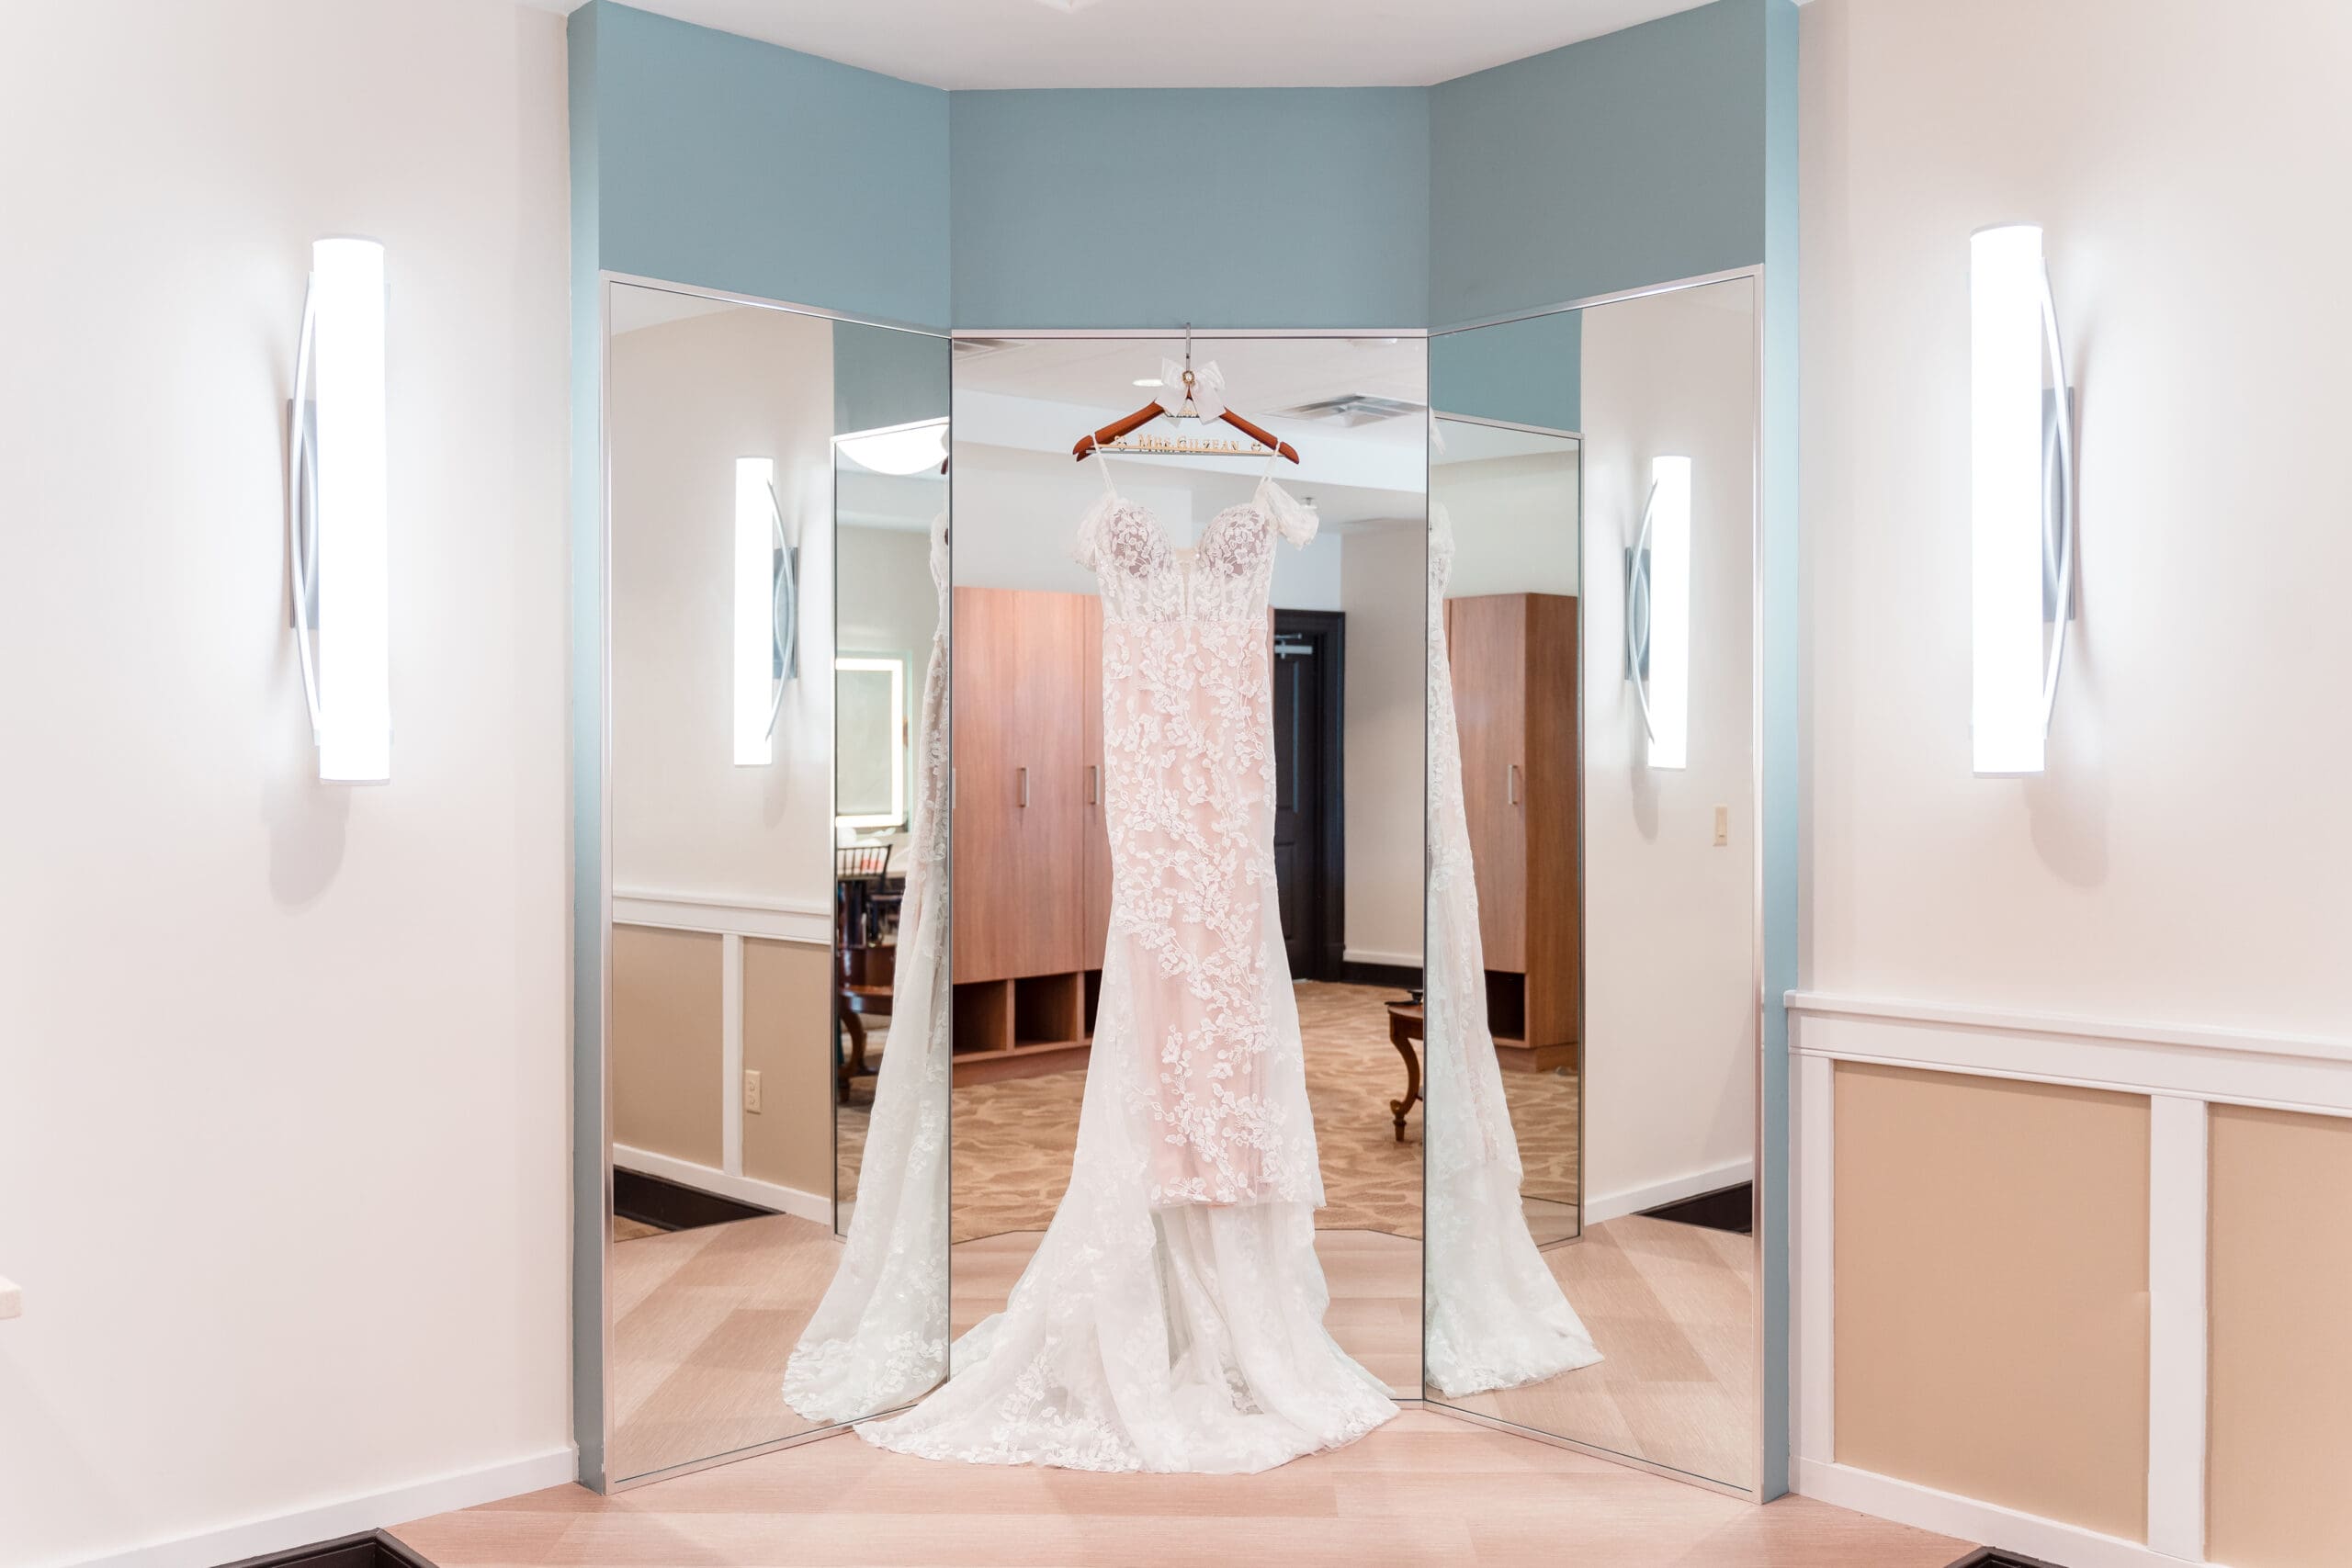 Lateisha's wedding dress hanging elegantly in front of a tri-fold mirror.